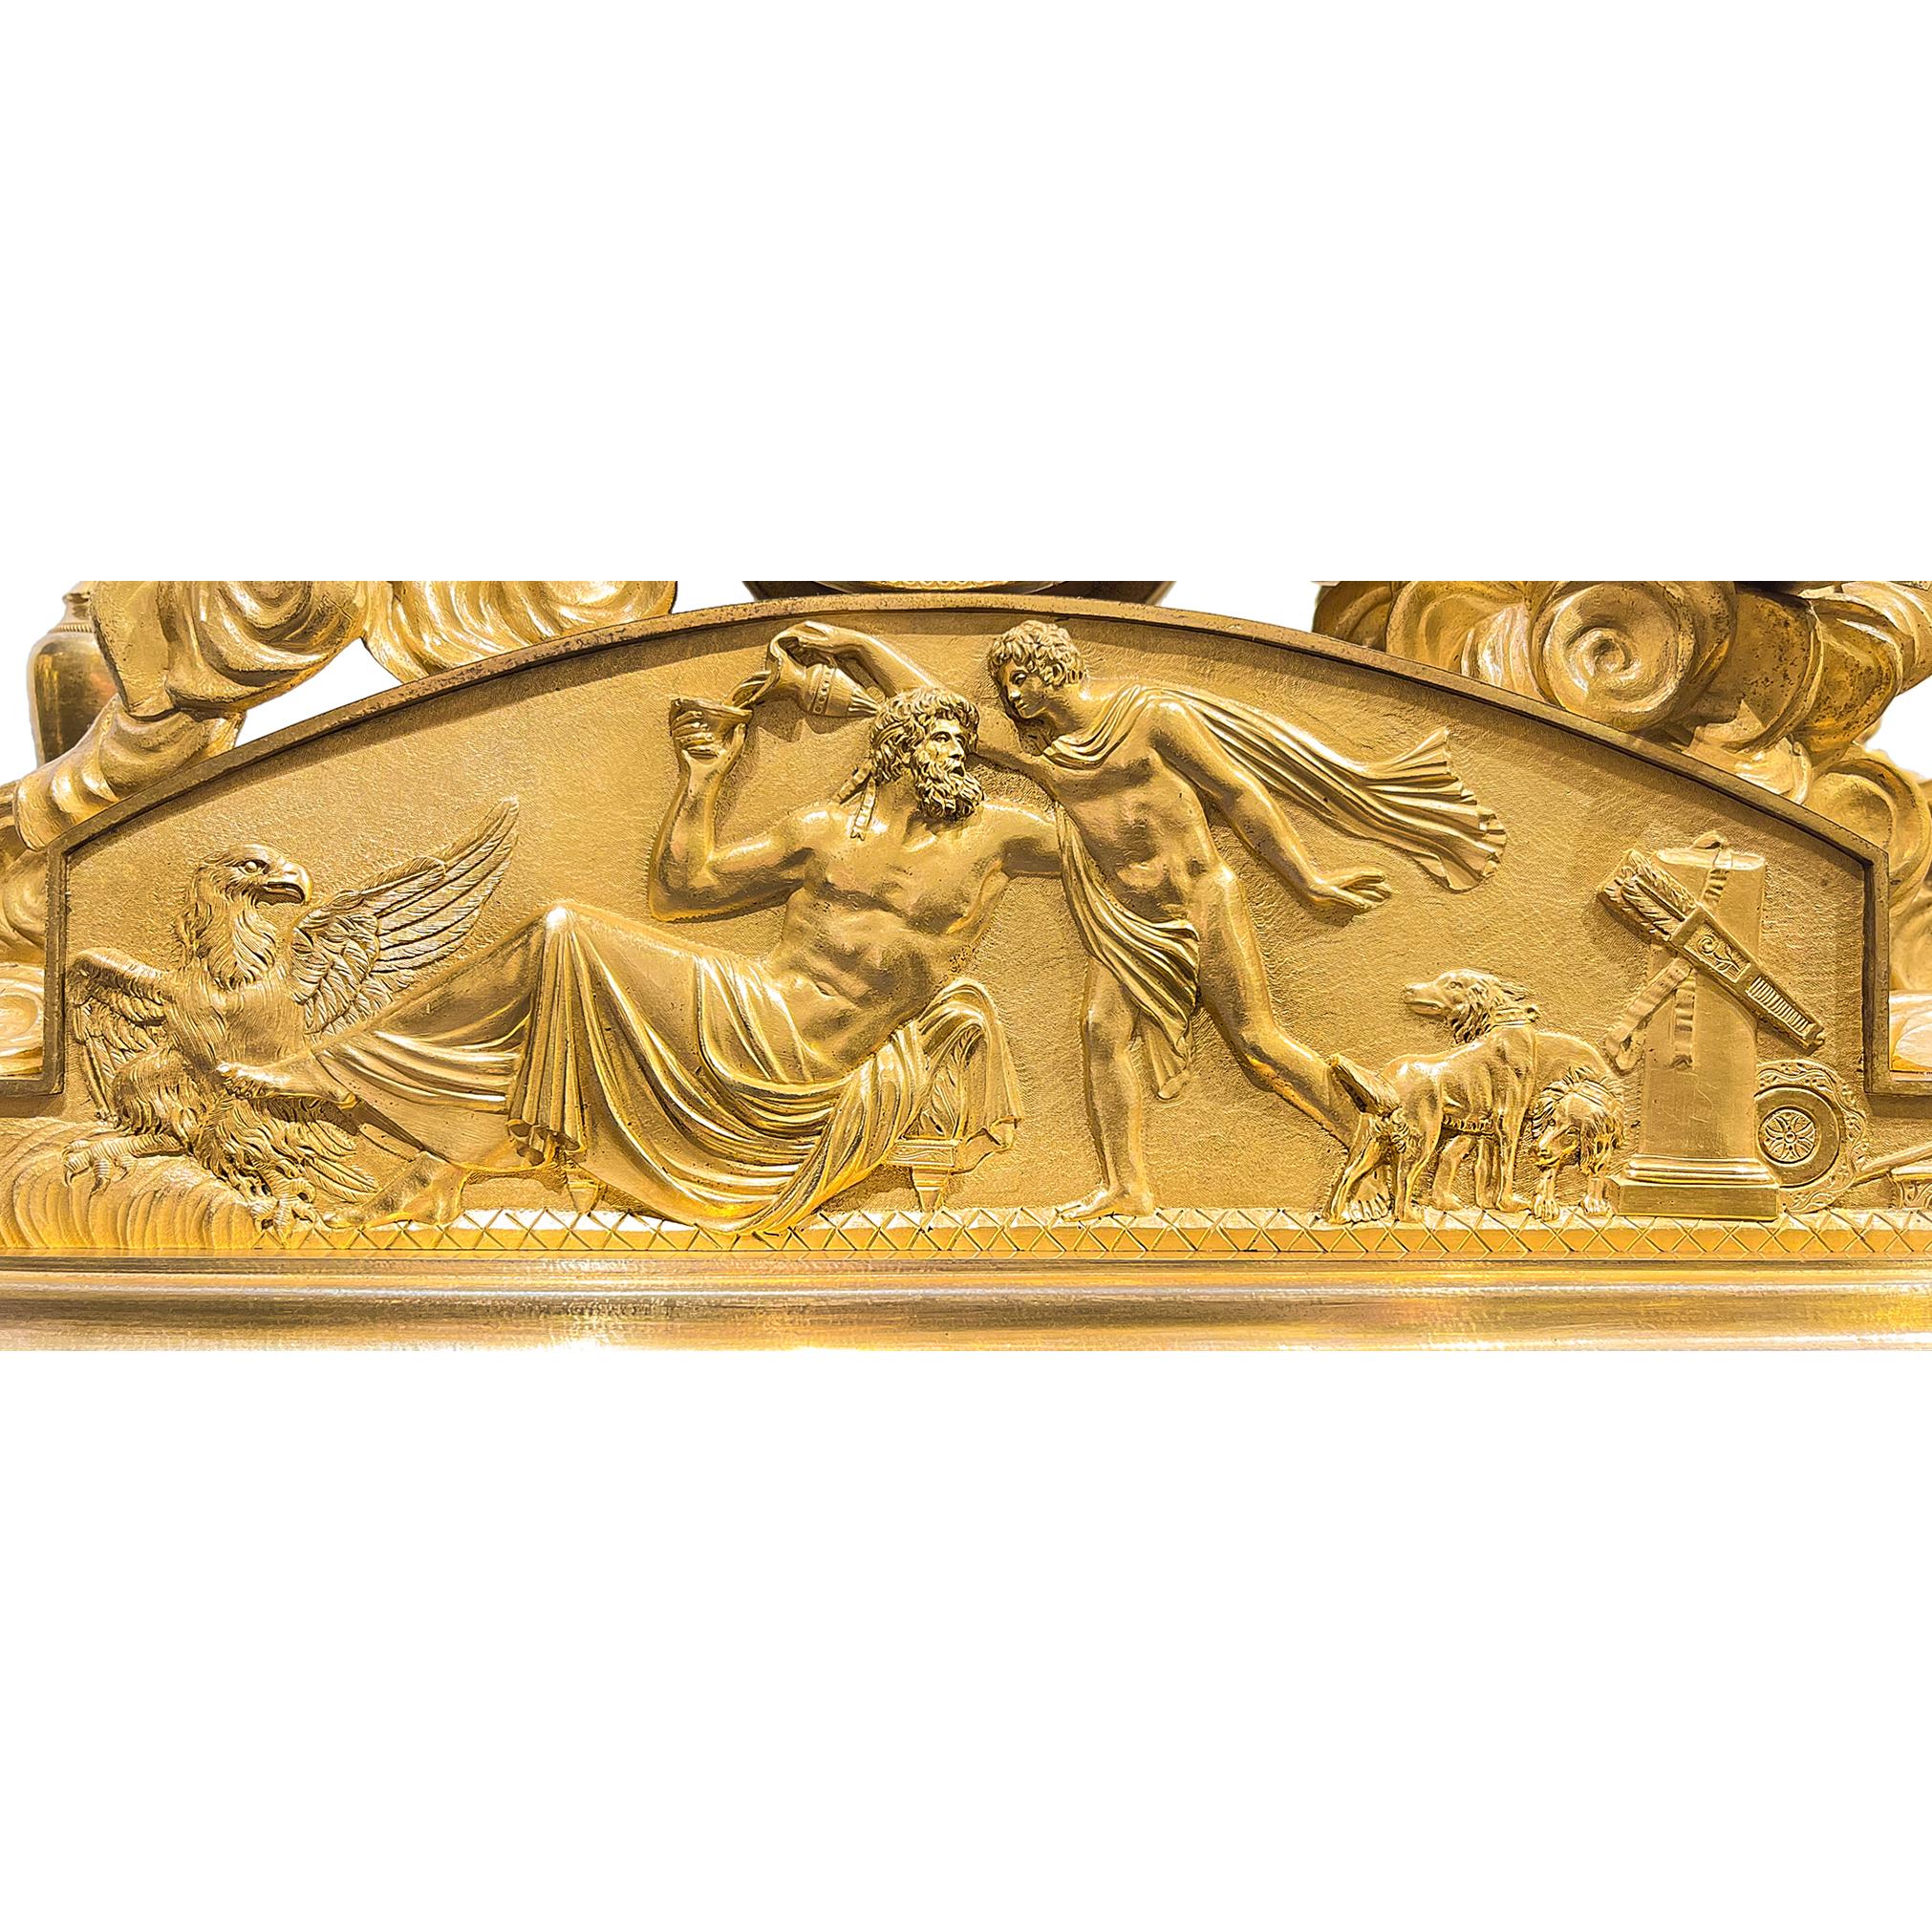 French Empire Chariot Clock with Bronzed Putti, Eagles, and Neoclassical Bas Relief 